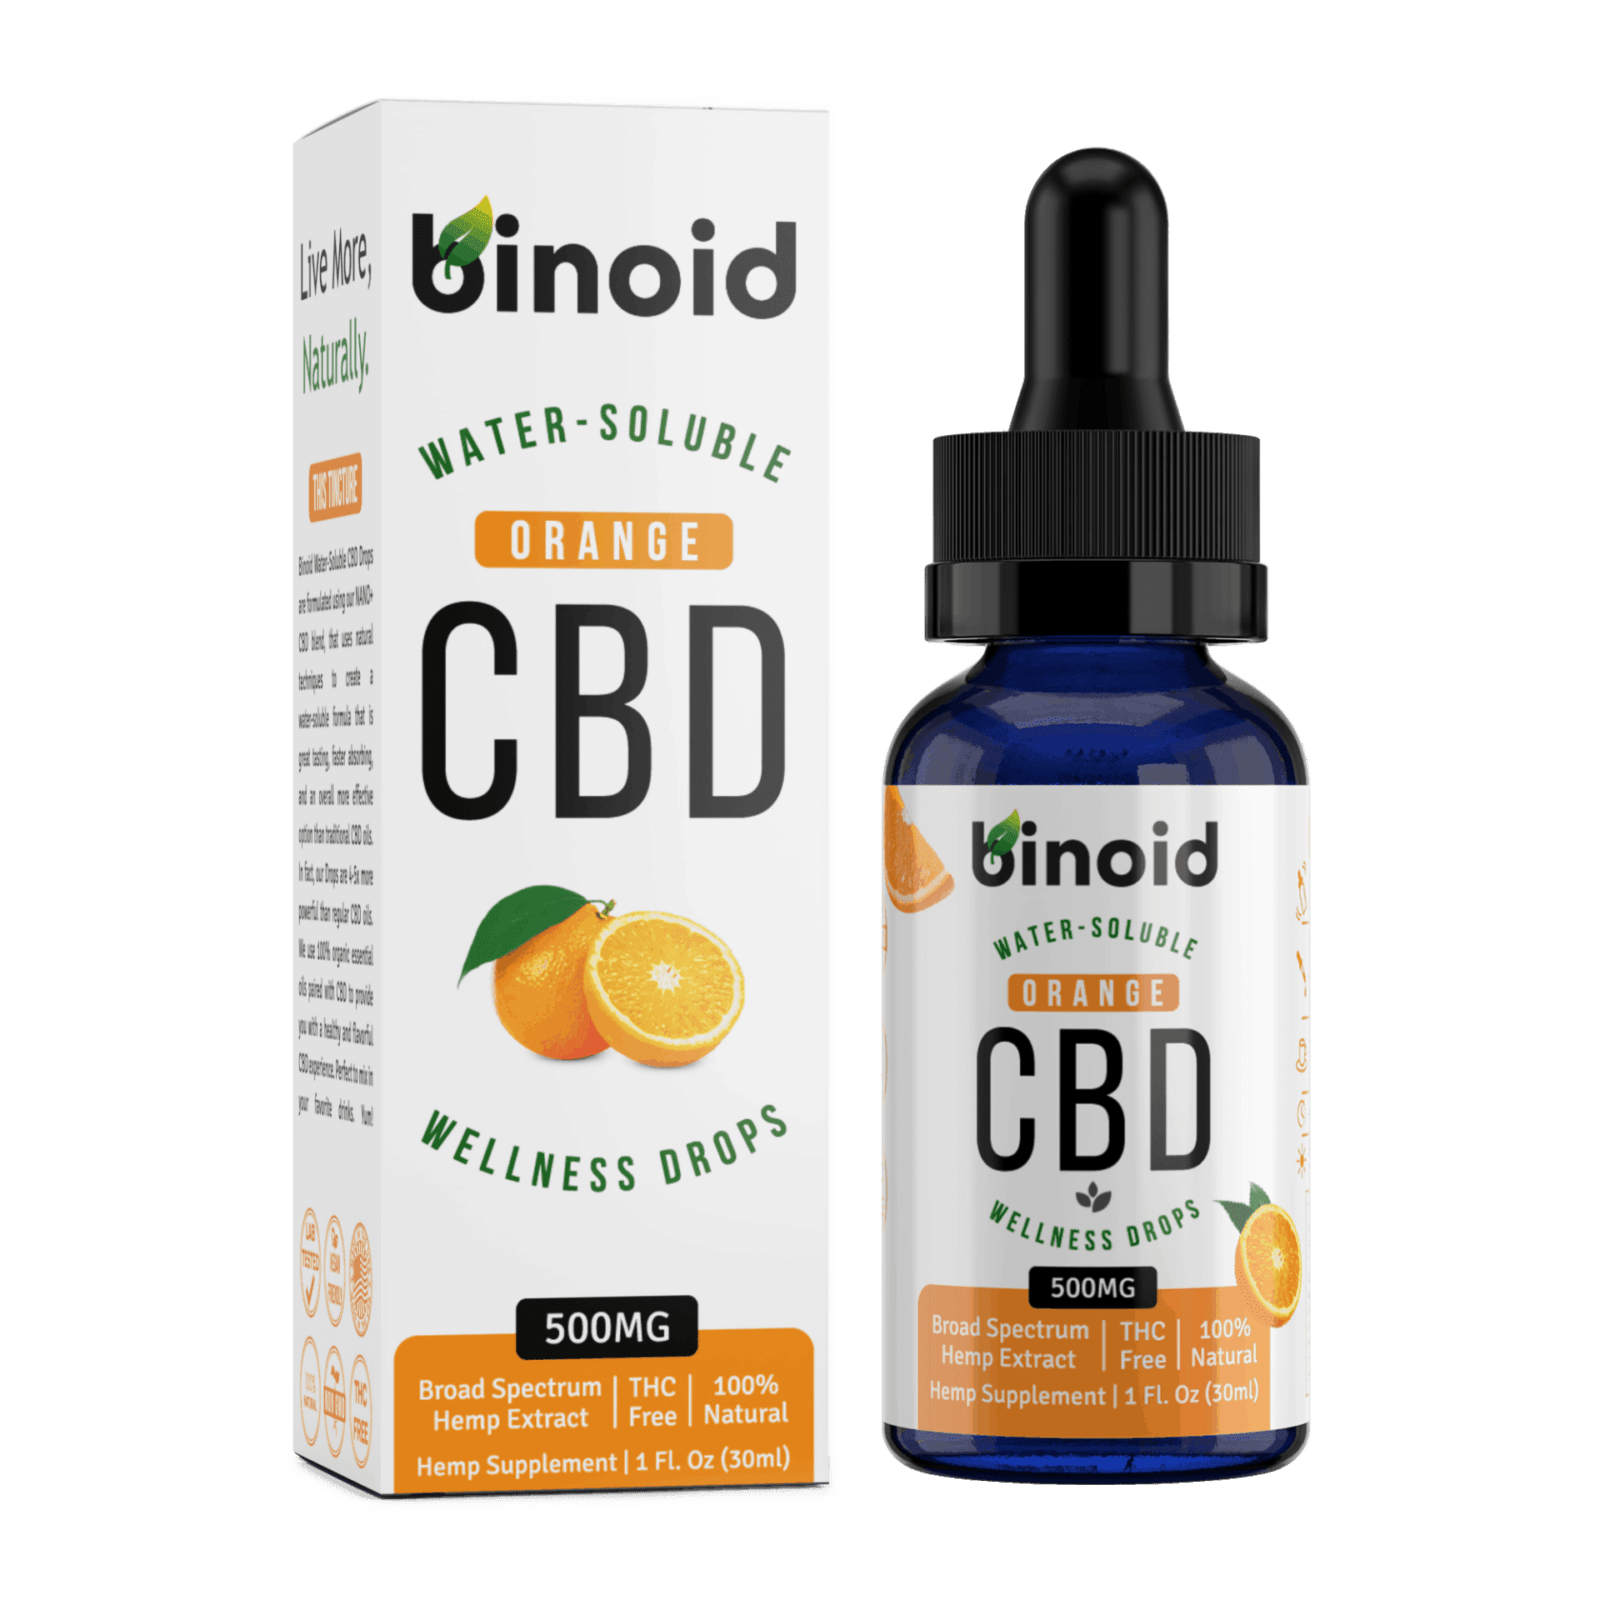 Binoid Water-Soluble CBD Drops-Orange bottle and box front image